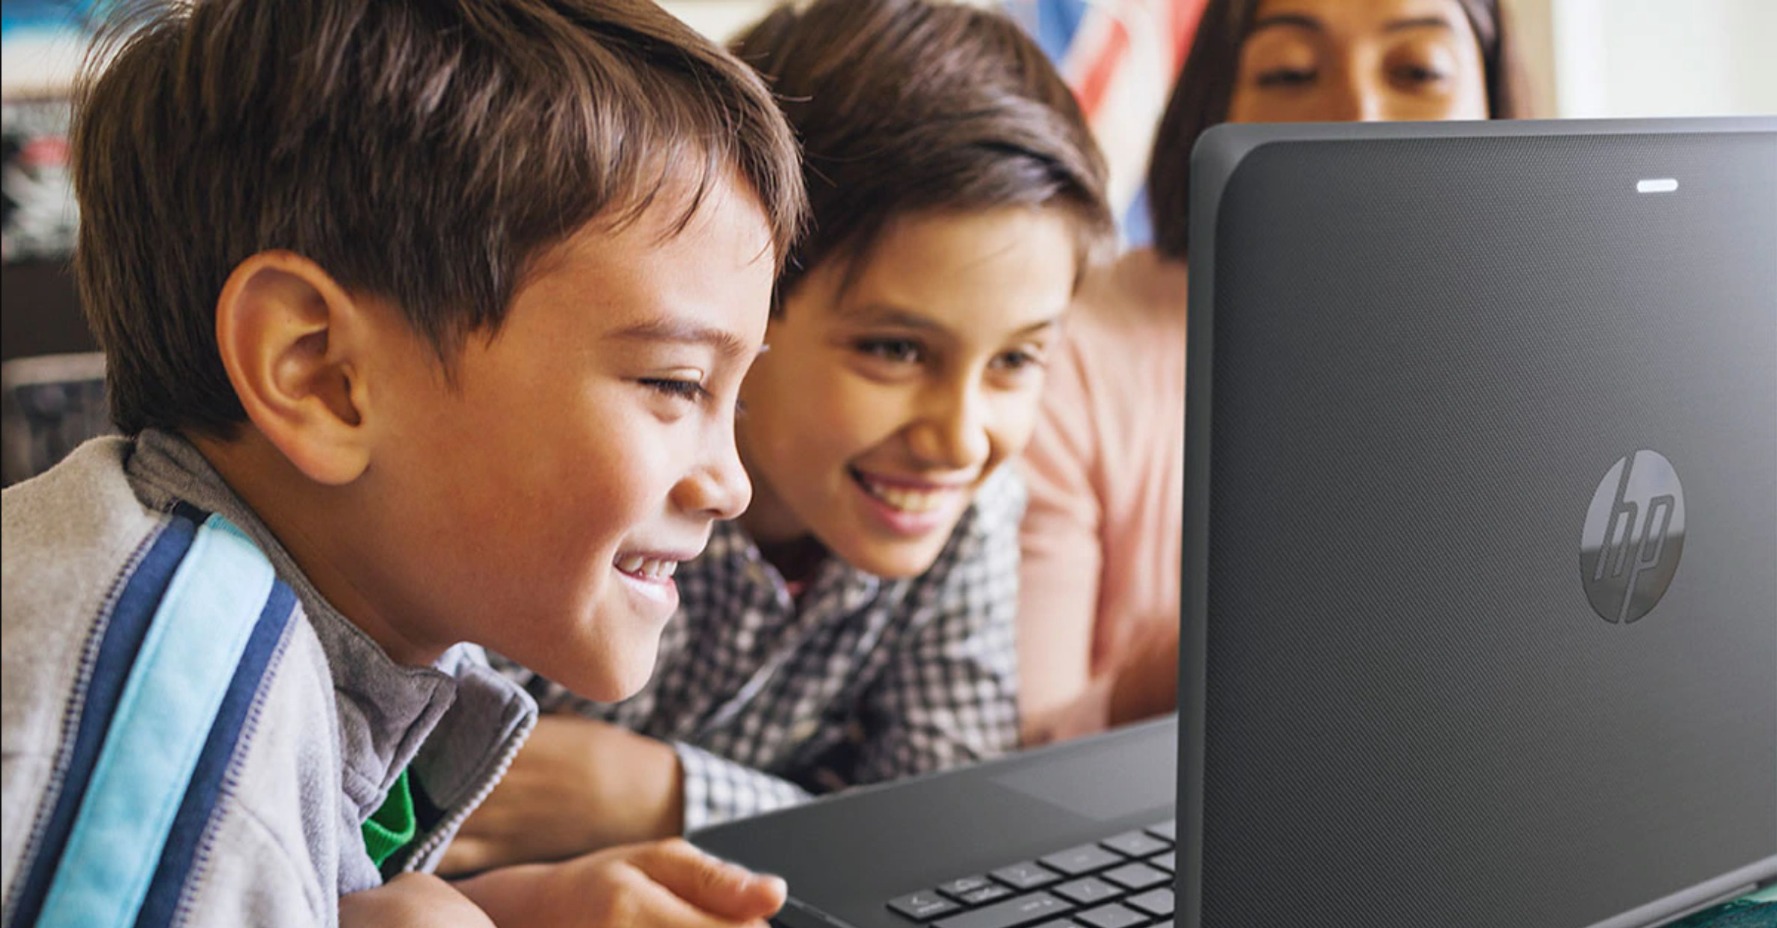 image of 2 boys looking at a laptop screen